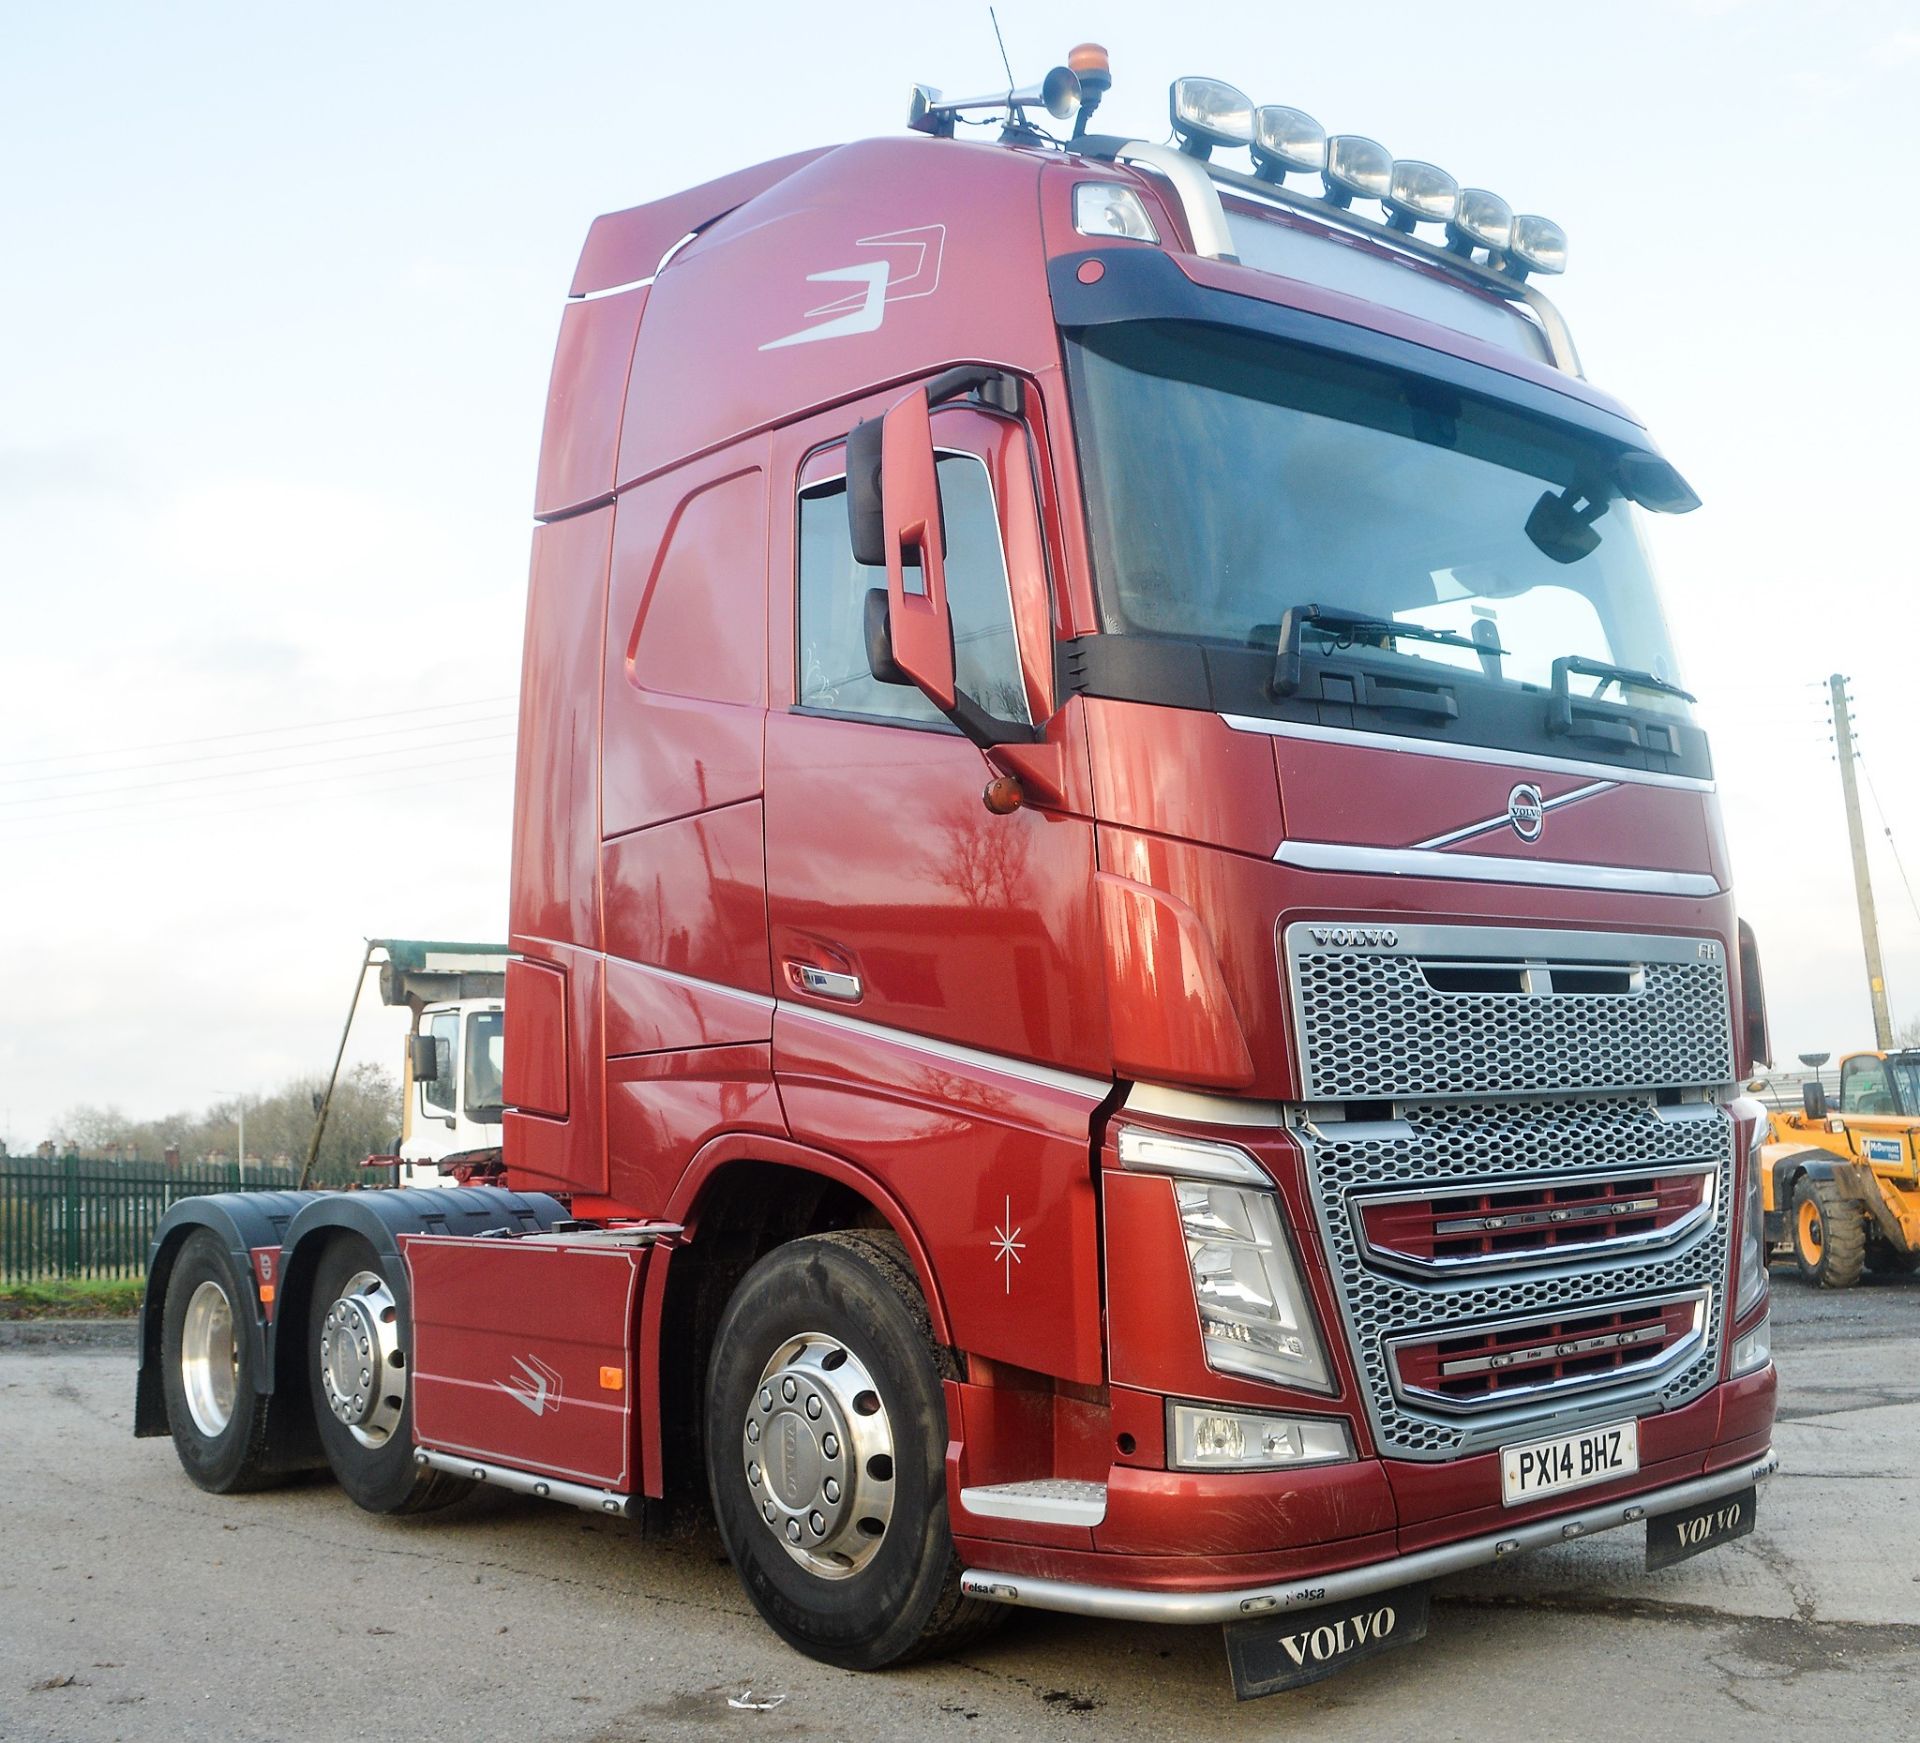 Volvo FH13 EuroV 500 HP 6 x 2 tractor unit Registration Number: PX14 BHZ Date of Registration: 15/ - Image 2 of 8